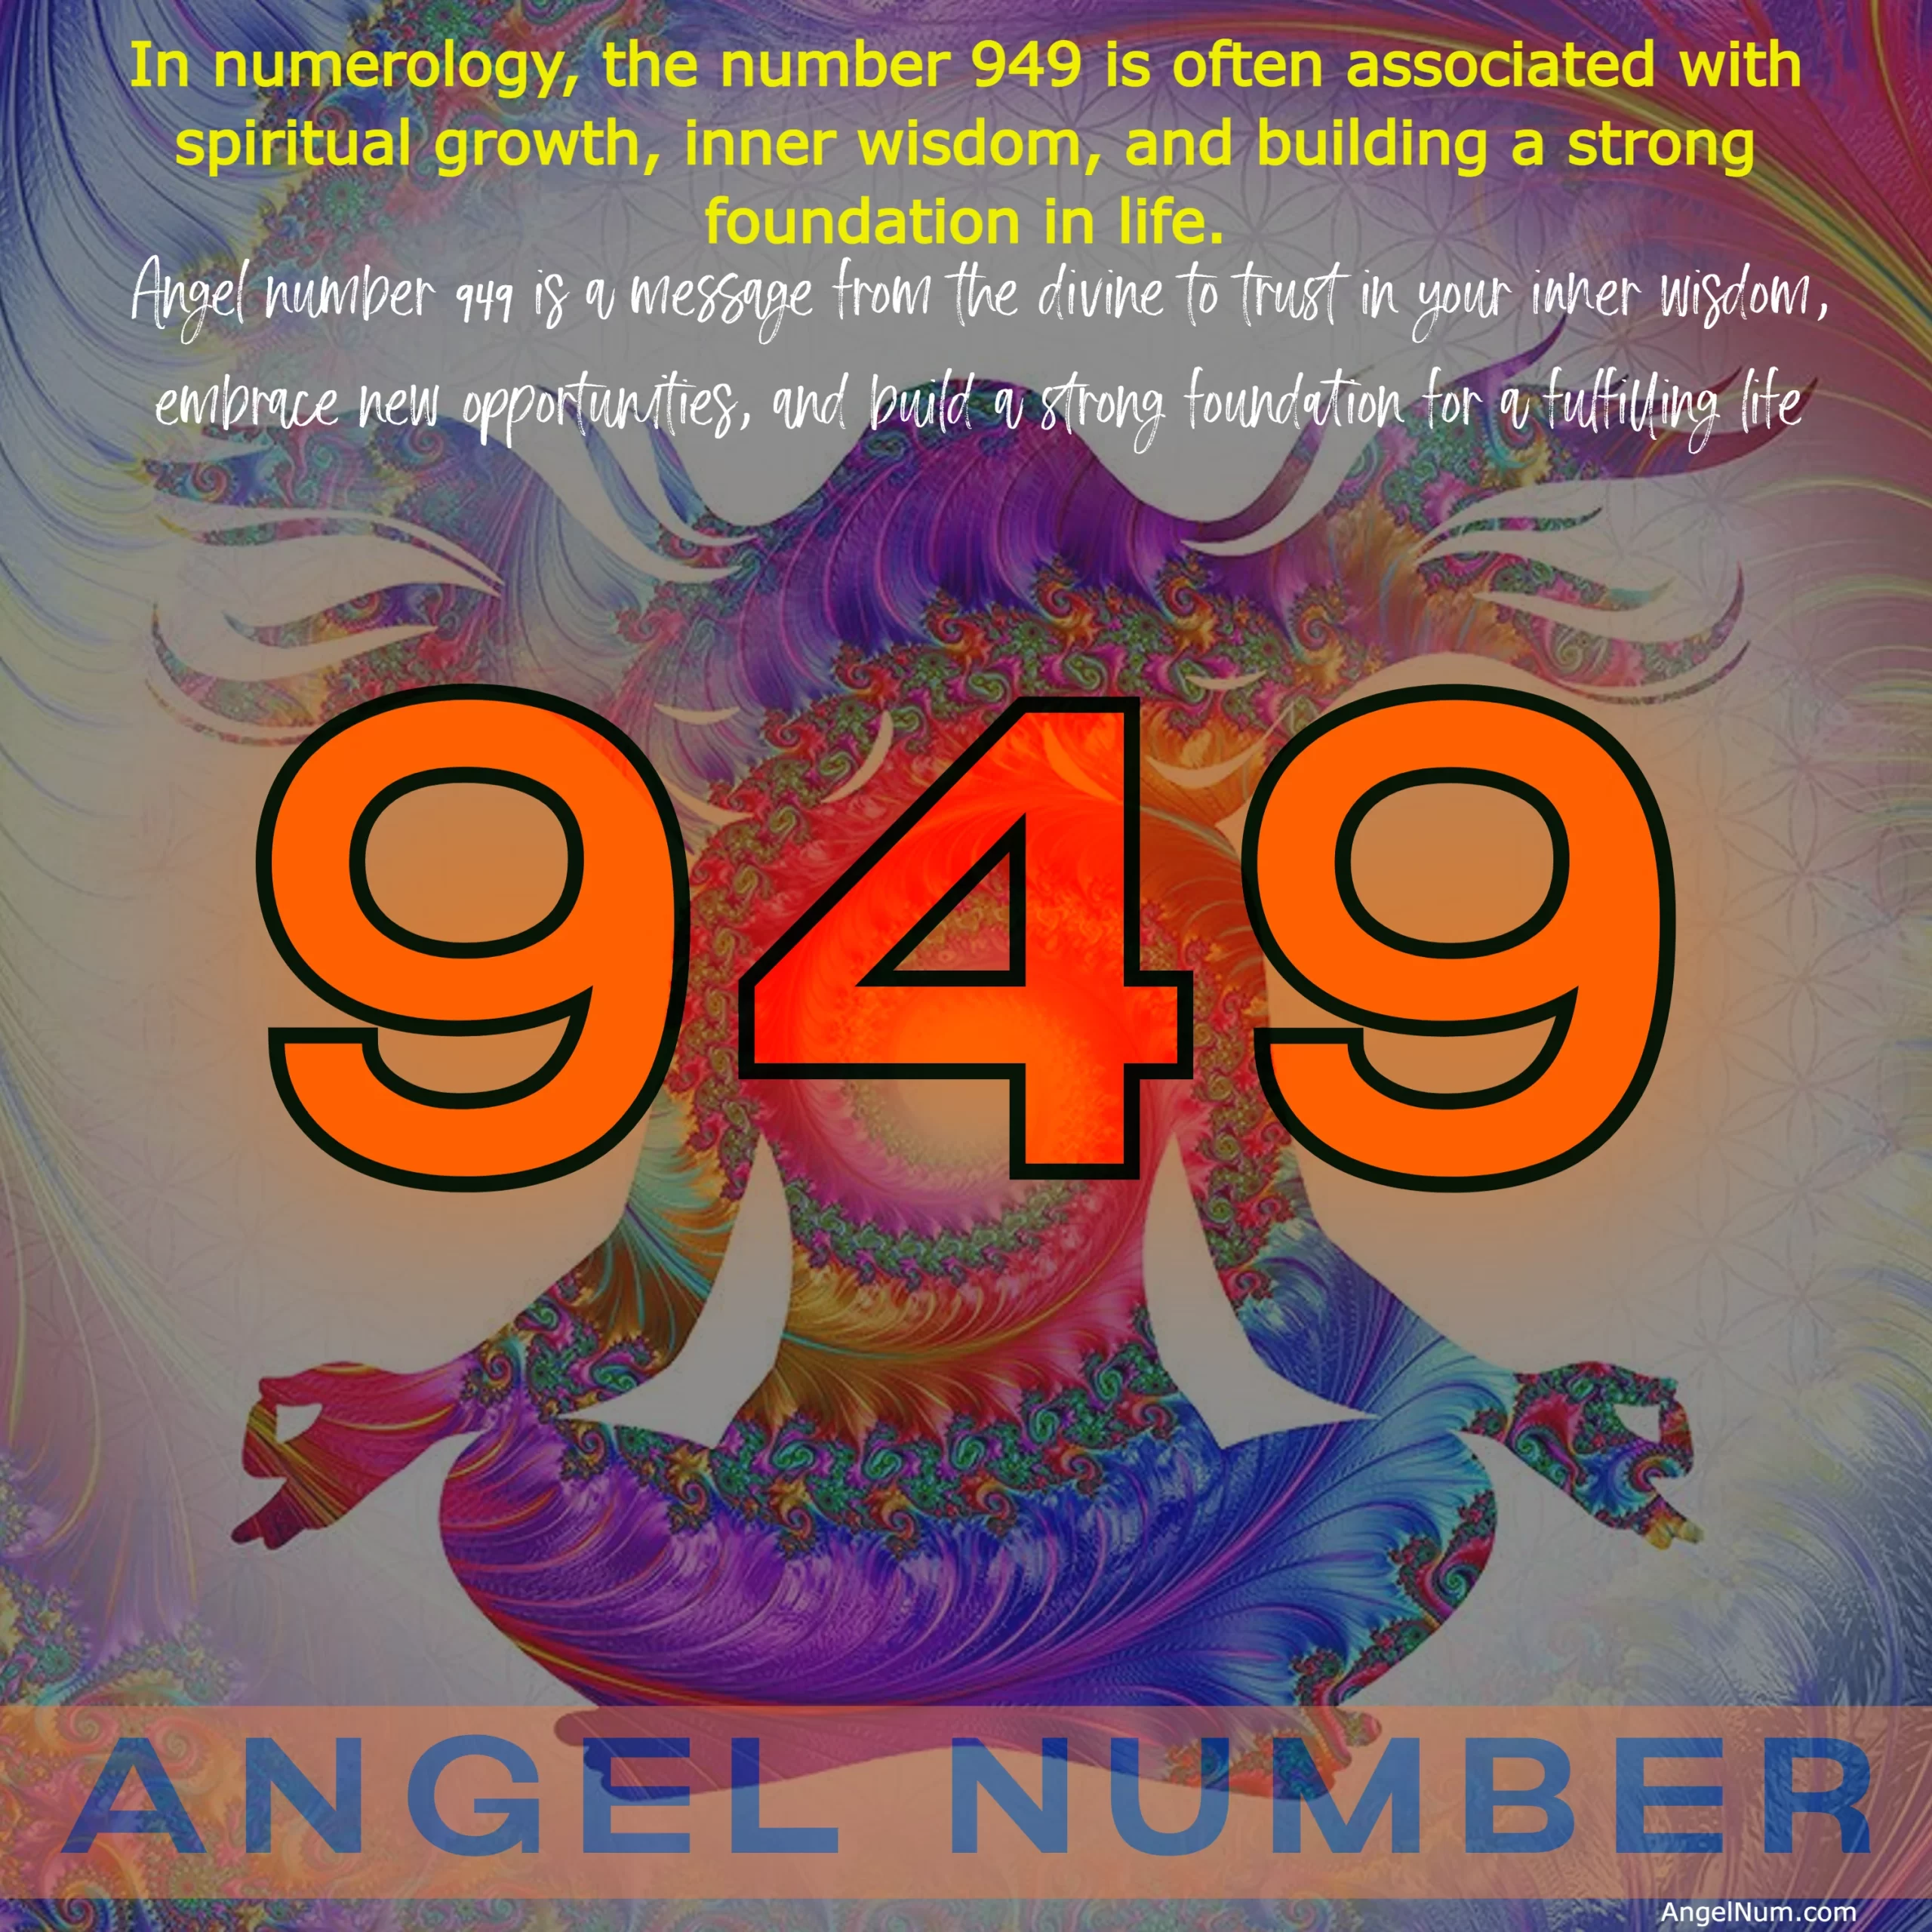 Discovering the Hidden Meanings Behind Angel Number 949